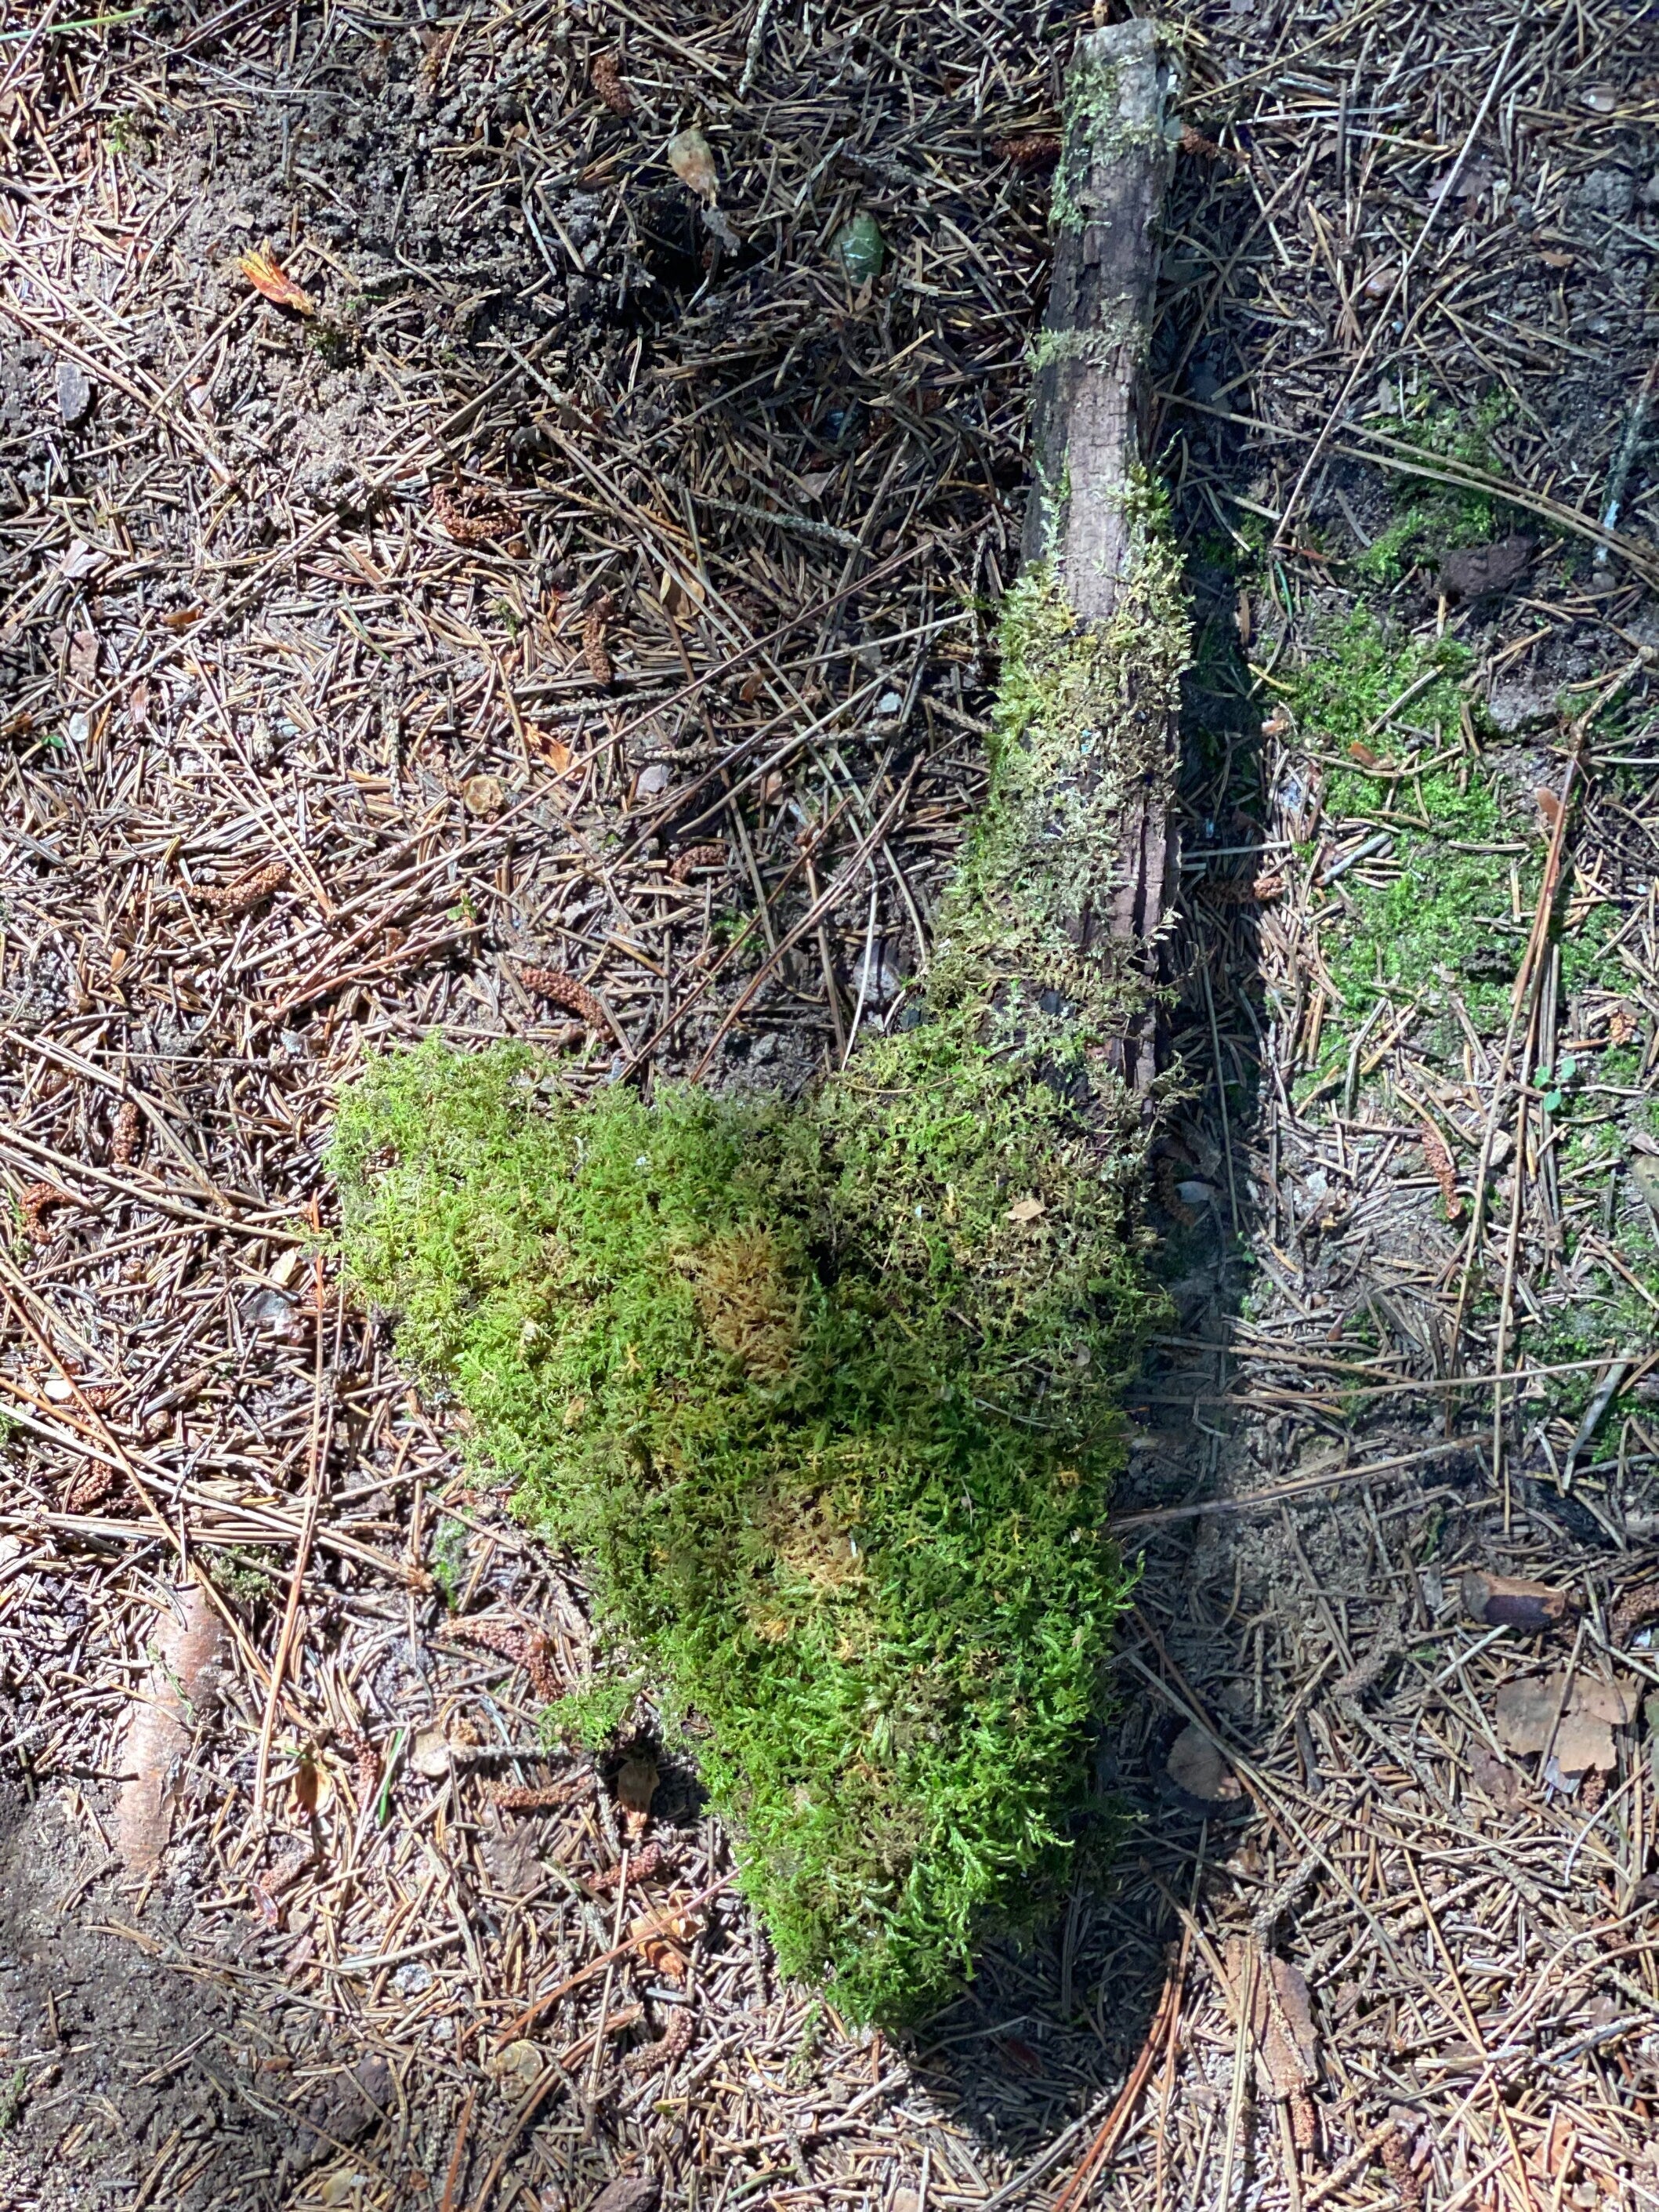 Moss Covered Log, Mossy Log, 14 Inches Long by 6 Inches Wide and 2 Inches High